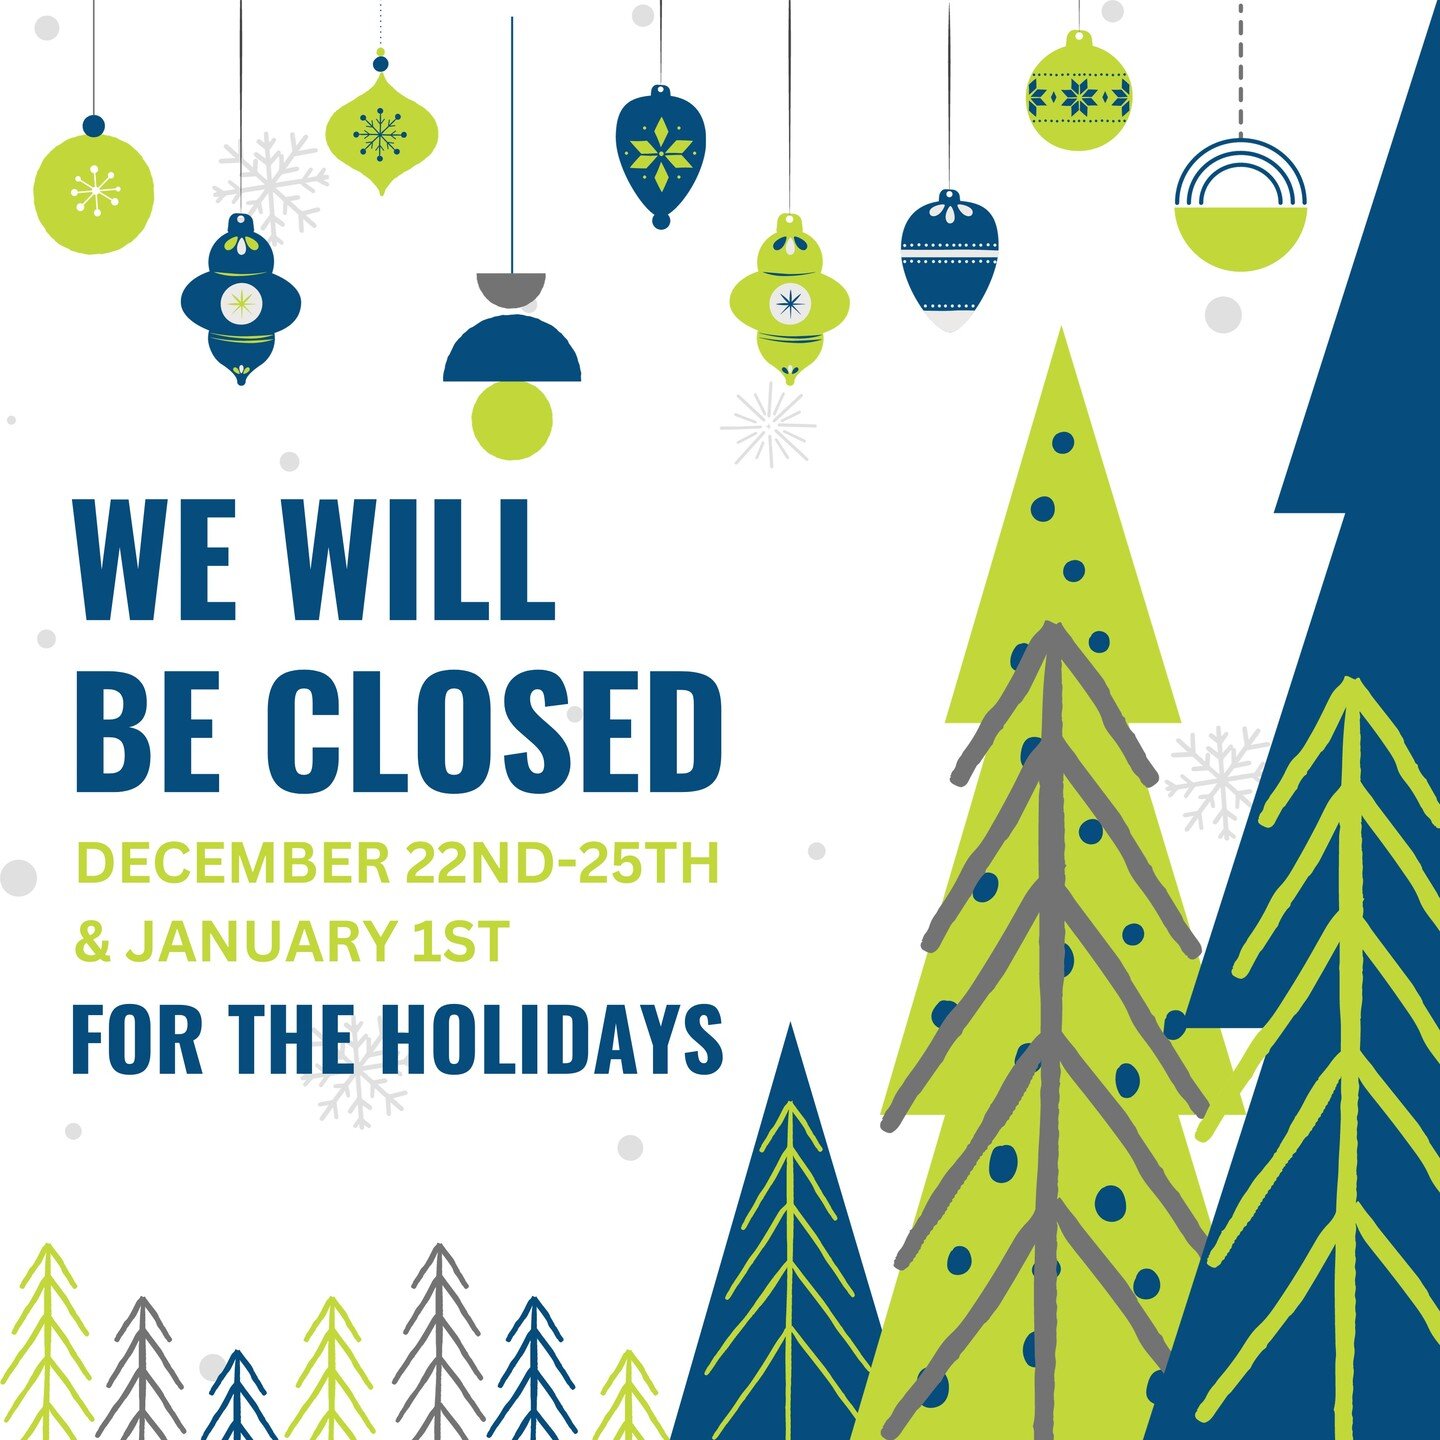 Our office will be closed from Friday, December 22nd through Monday, December 25th, and Monday, January 1st, in observance of the holidays. We will return to regular business hours on Tuesday, January 2nd.

We wish you and your loved ones a happy and